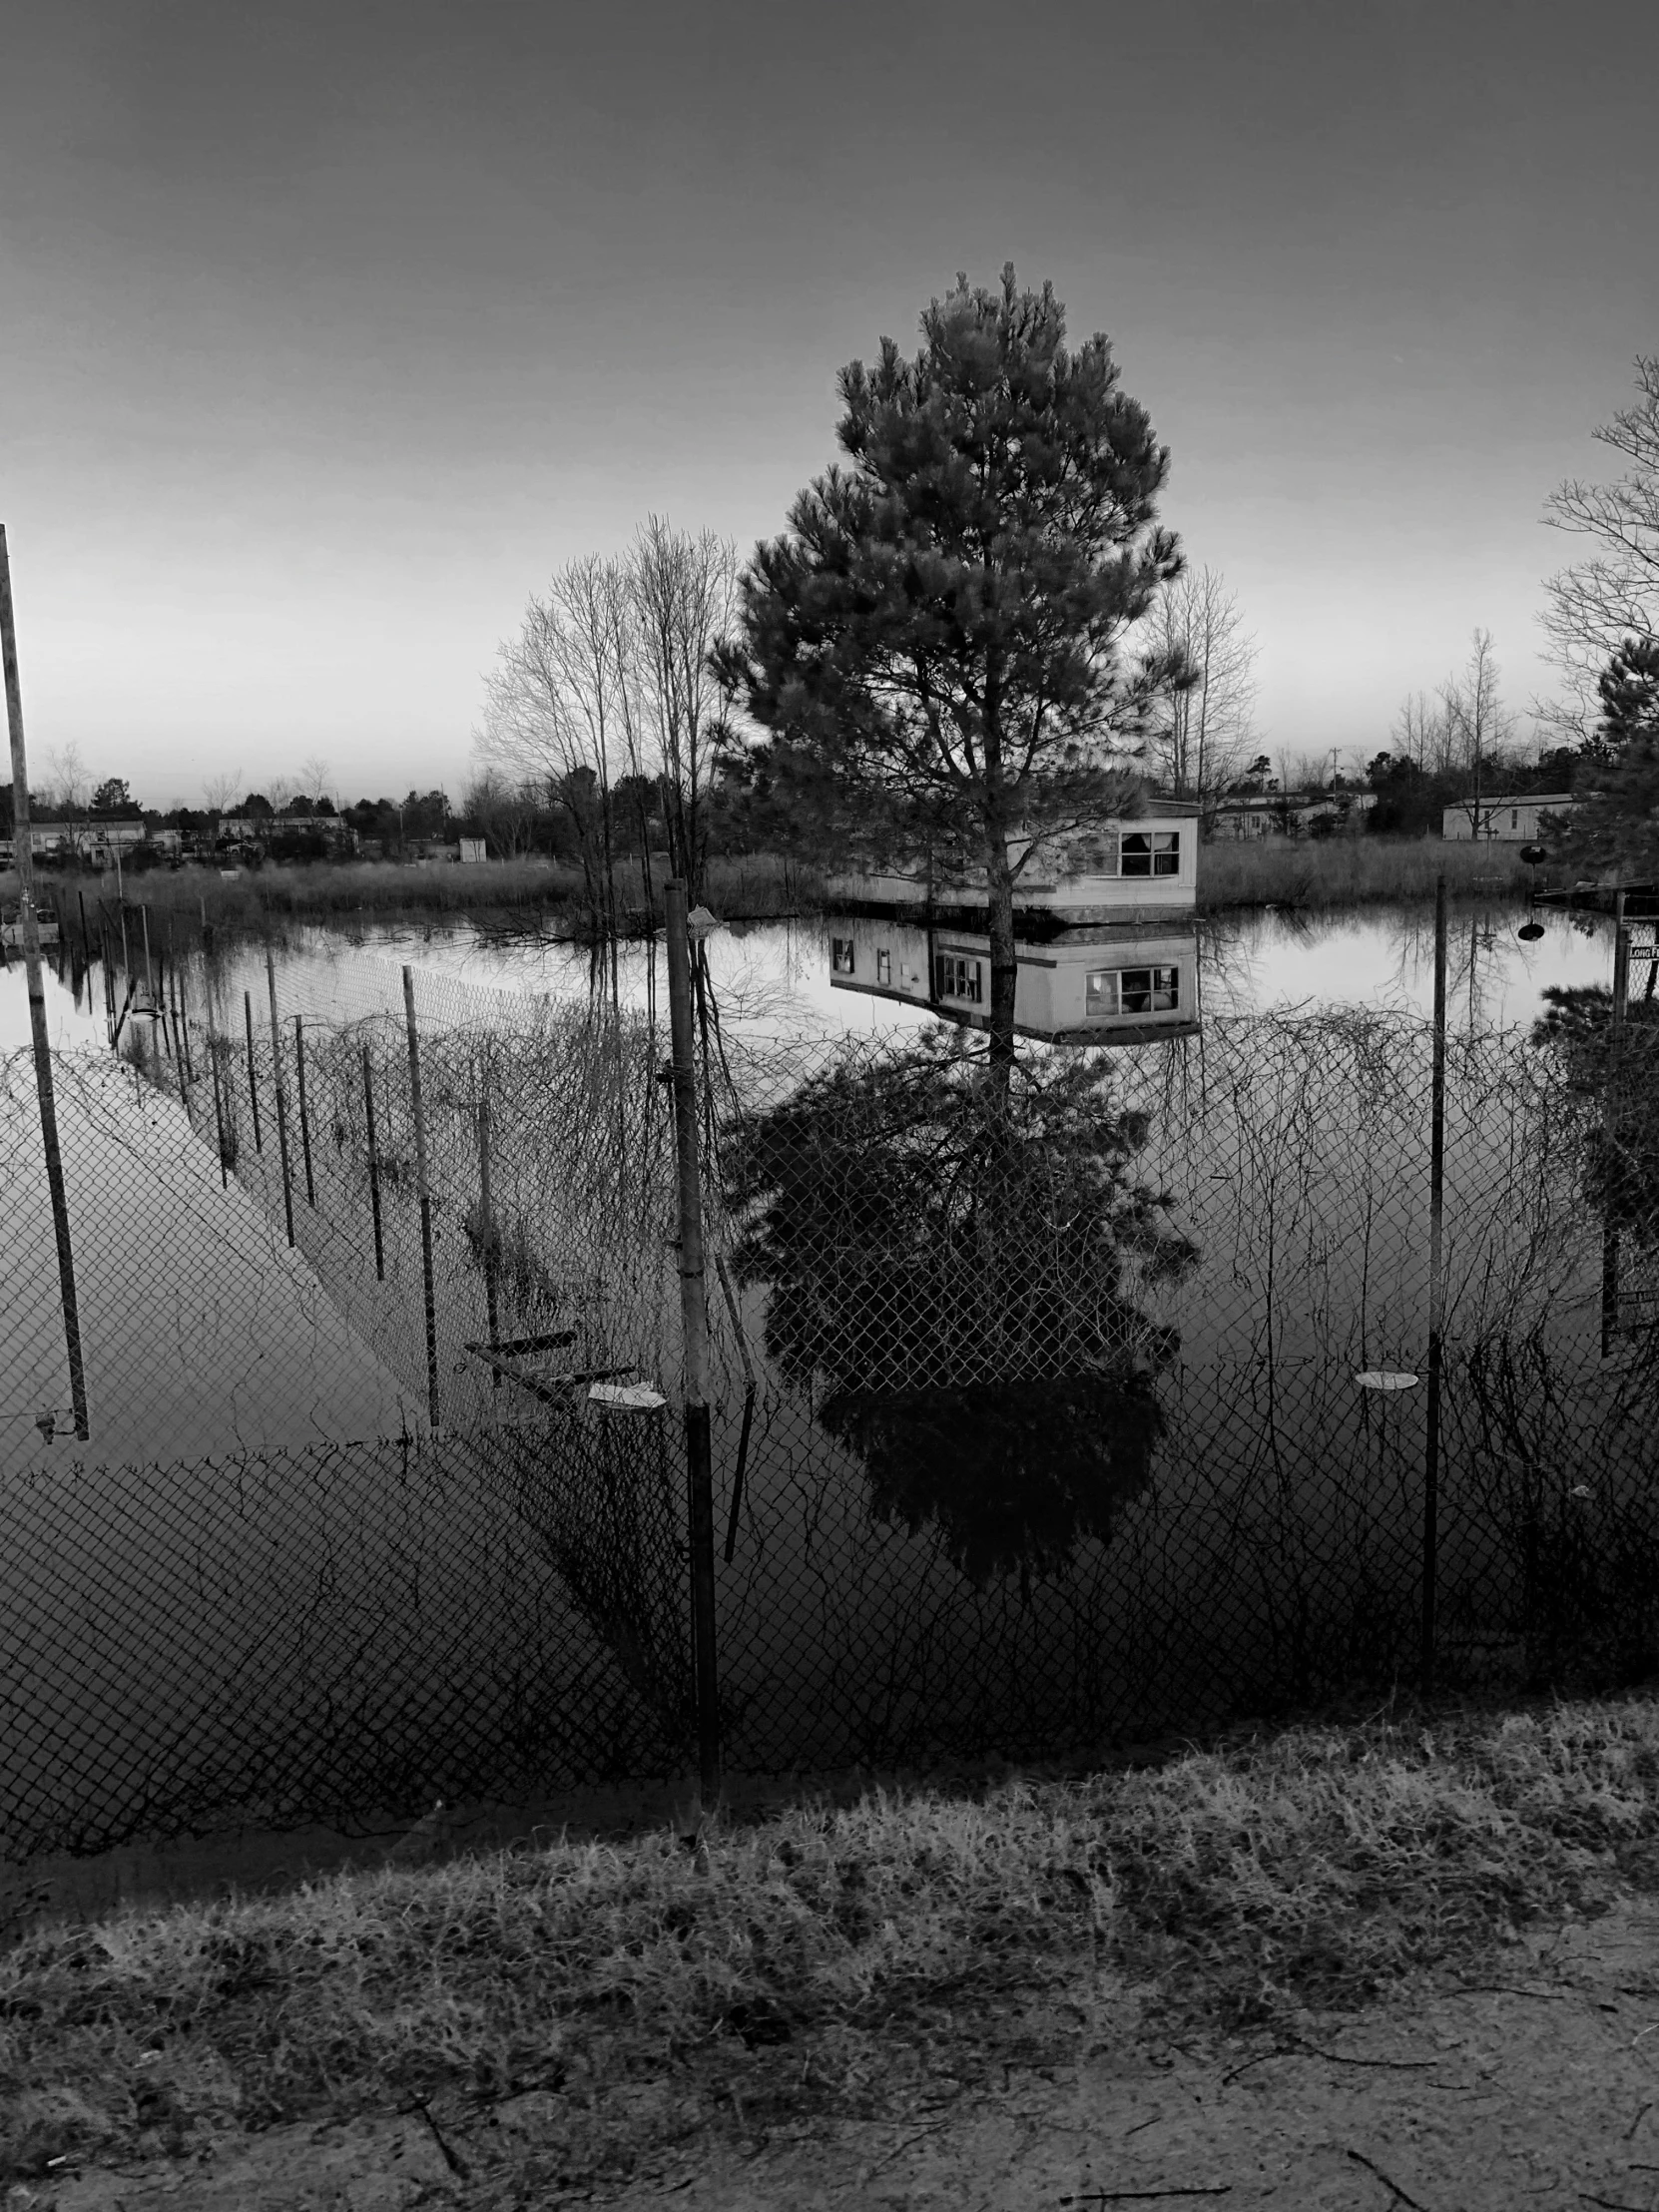 a black and white po of a house on a flooded road